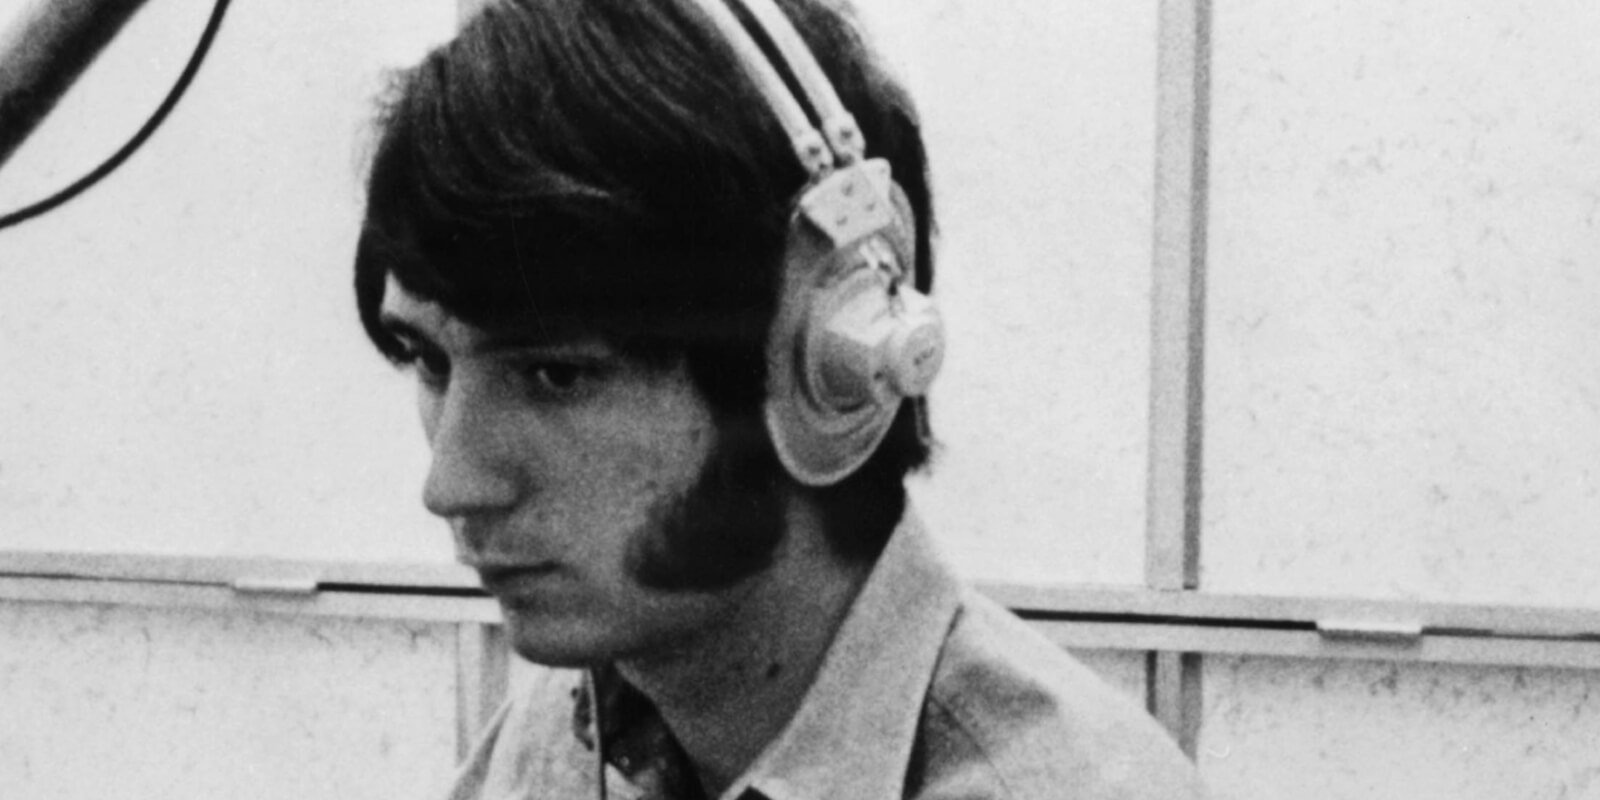 Mike Nesmith photographed at a recording studio in an undated photo.